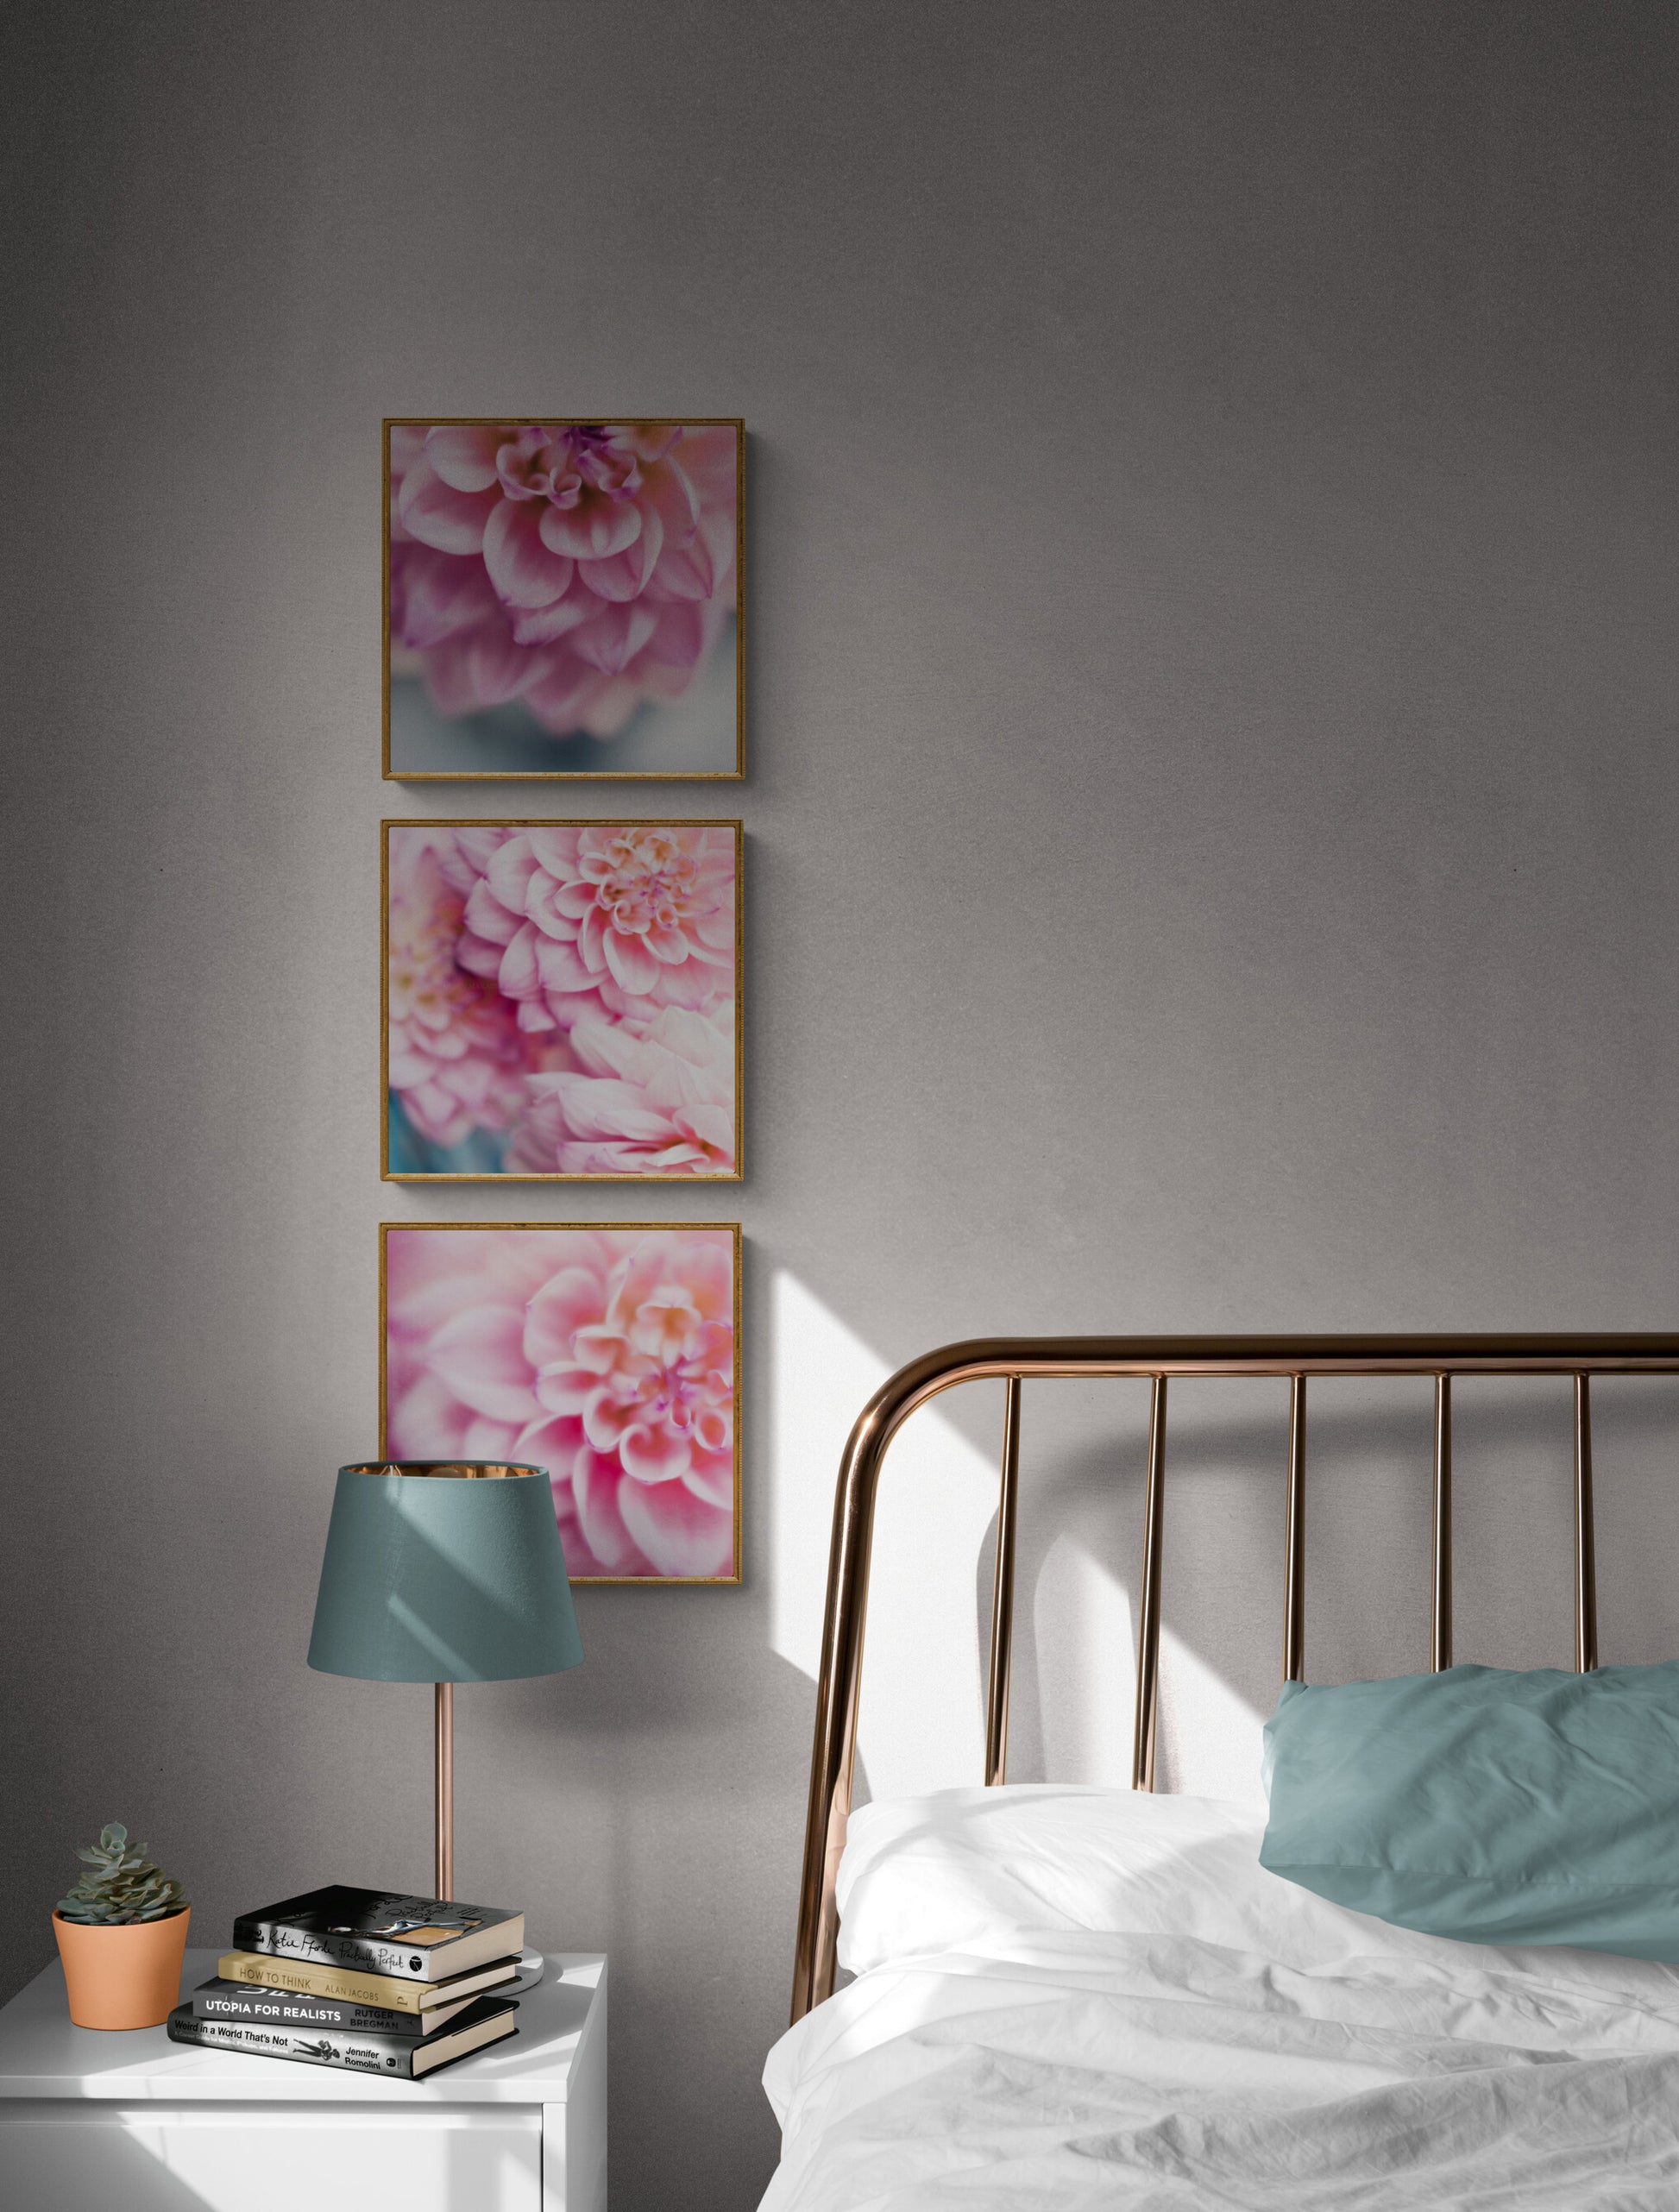 Three Square Dahlia Wall Art Photograph in a Bedroom